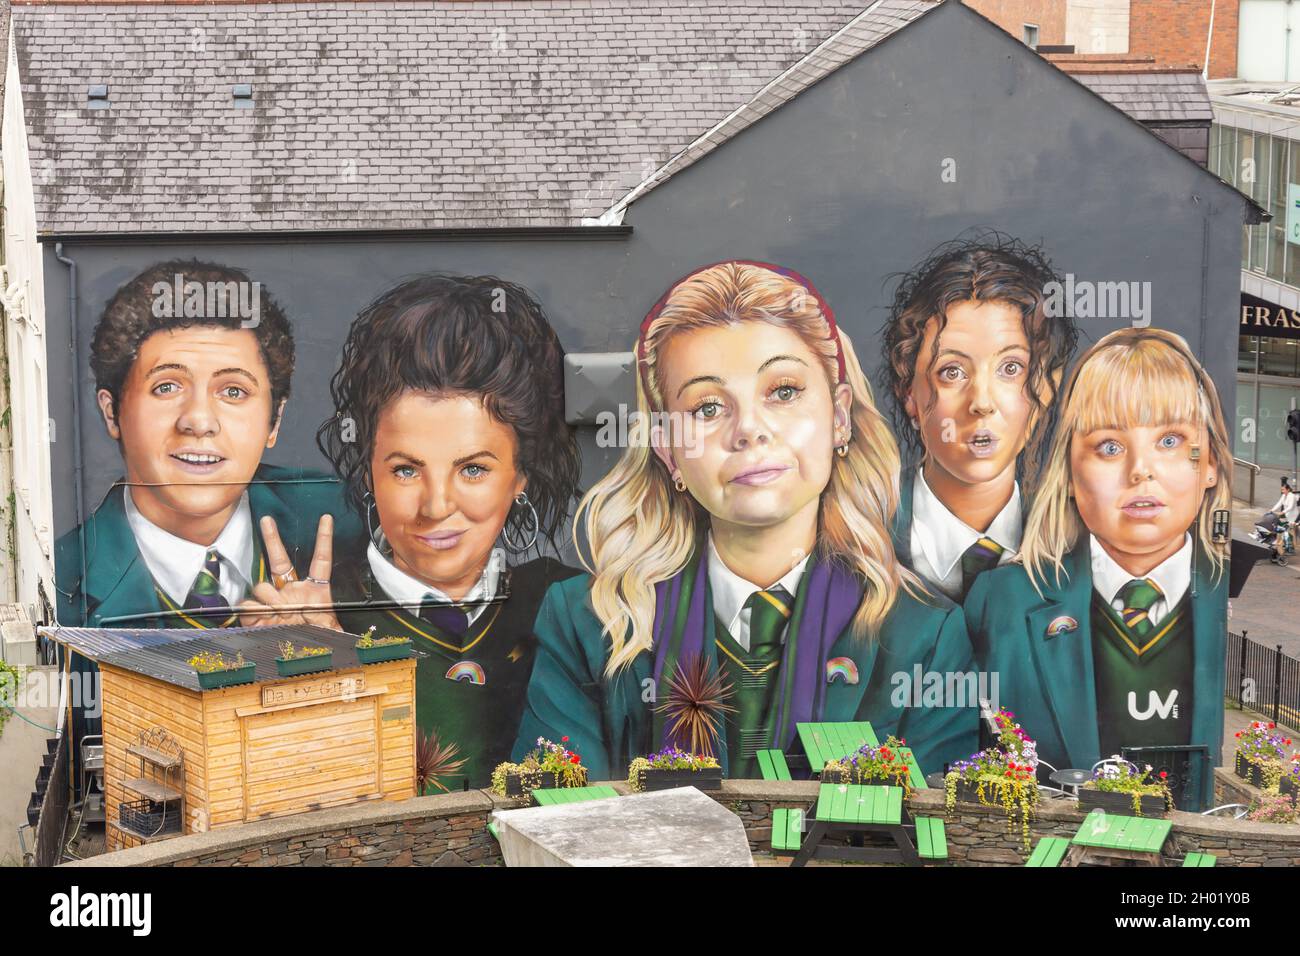 Derry Girls (TV comedy) mural, Orchard Street, Derry (Londonderry), County Derry, Northern Ireland, United Kingdom Stock Photo